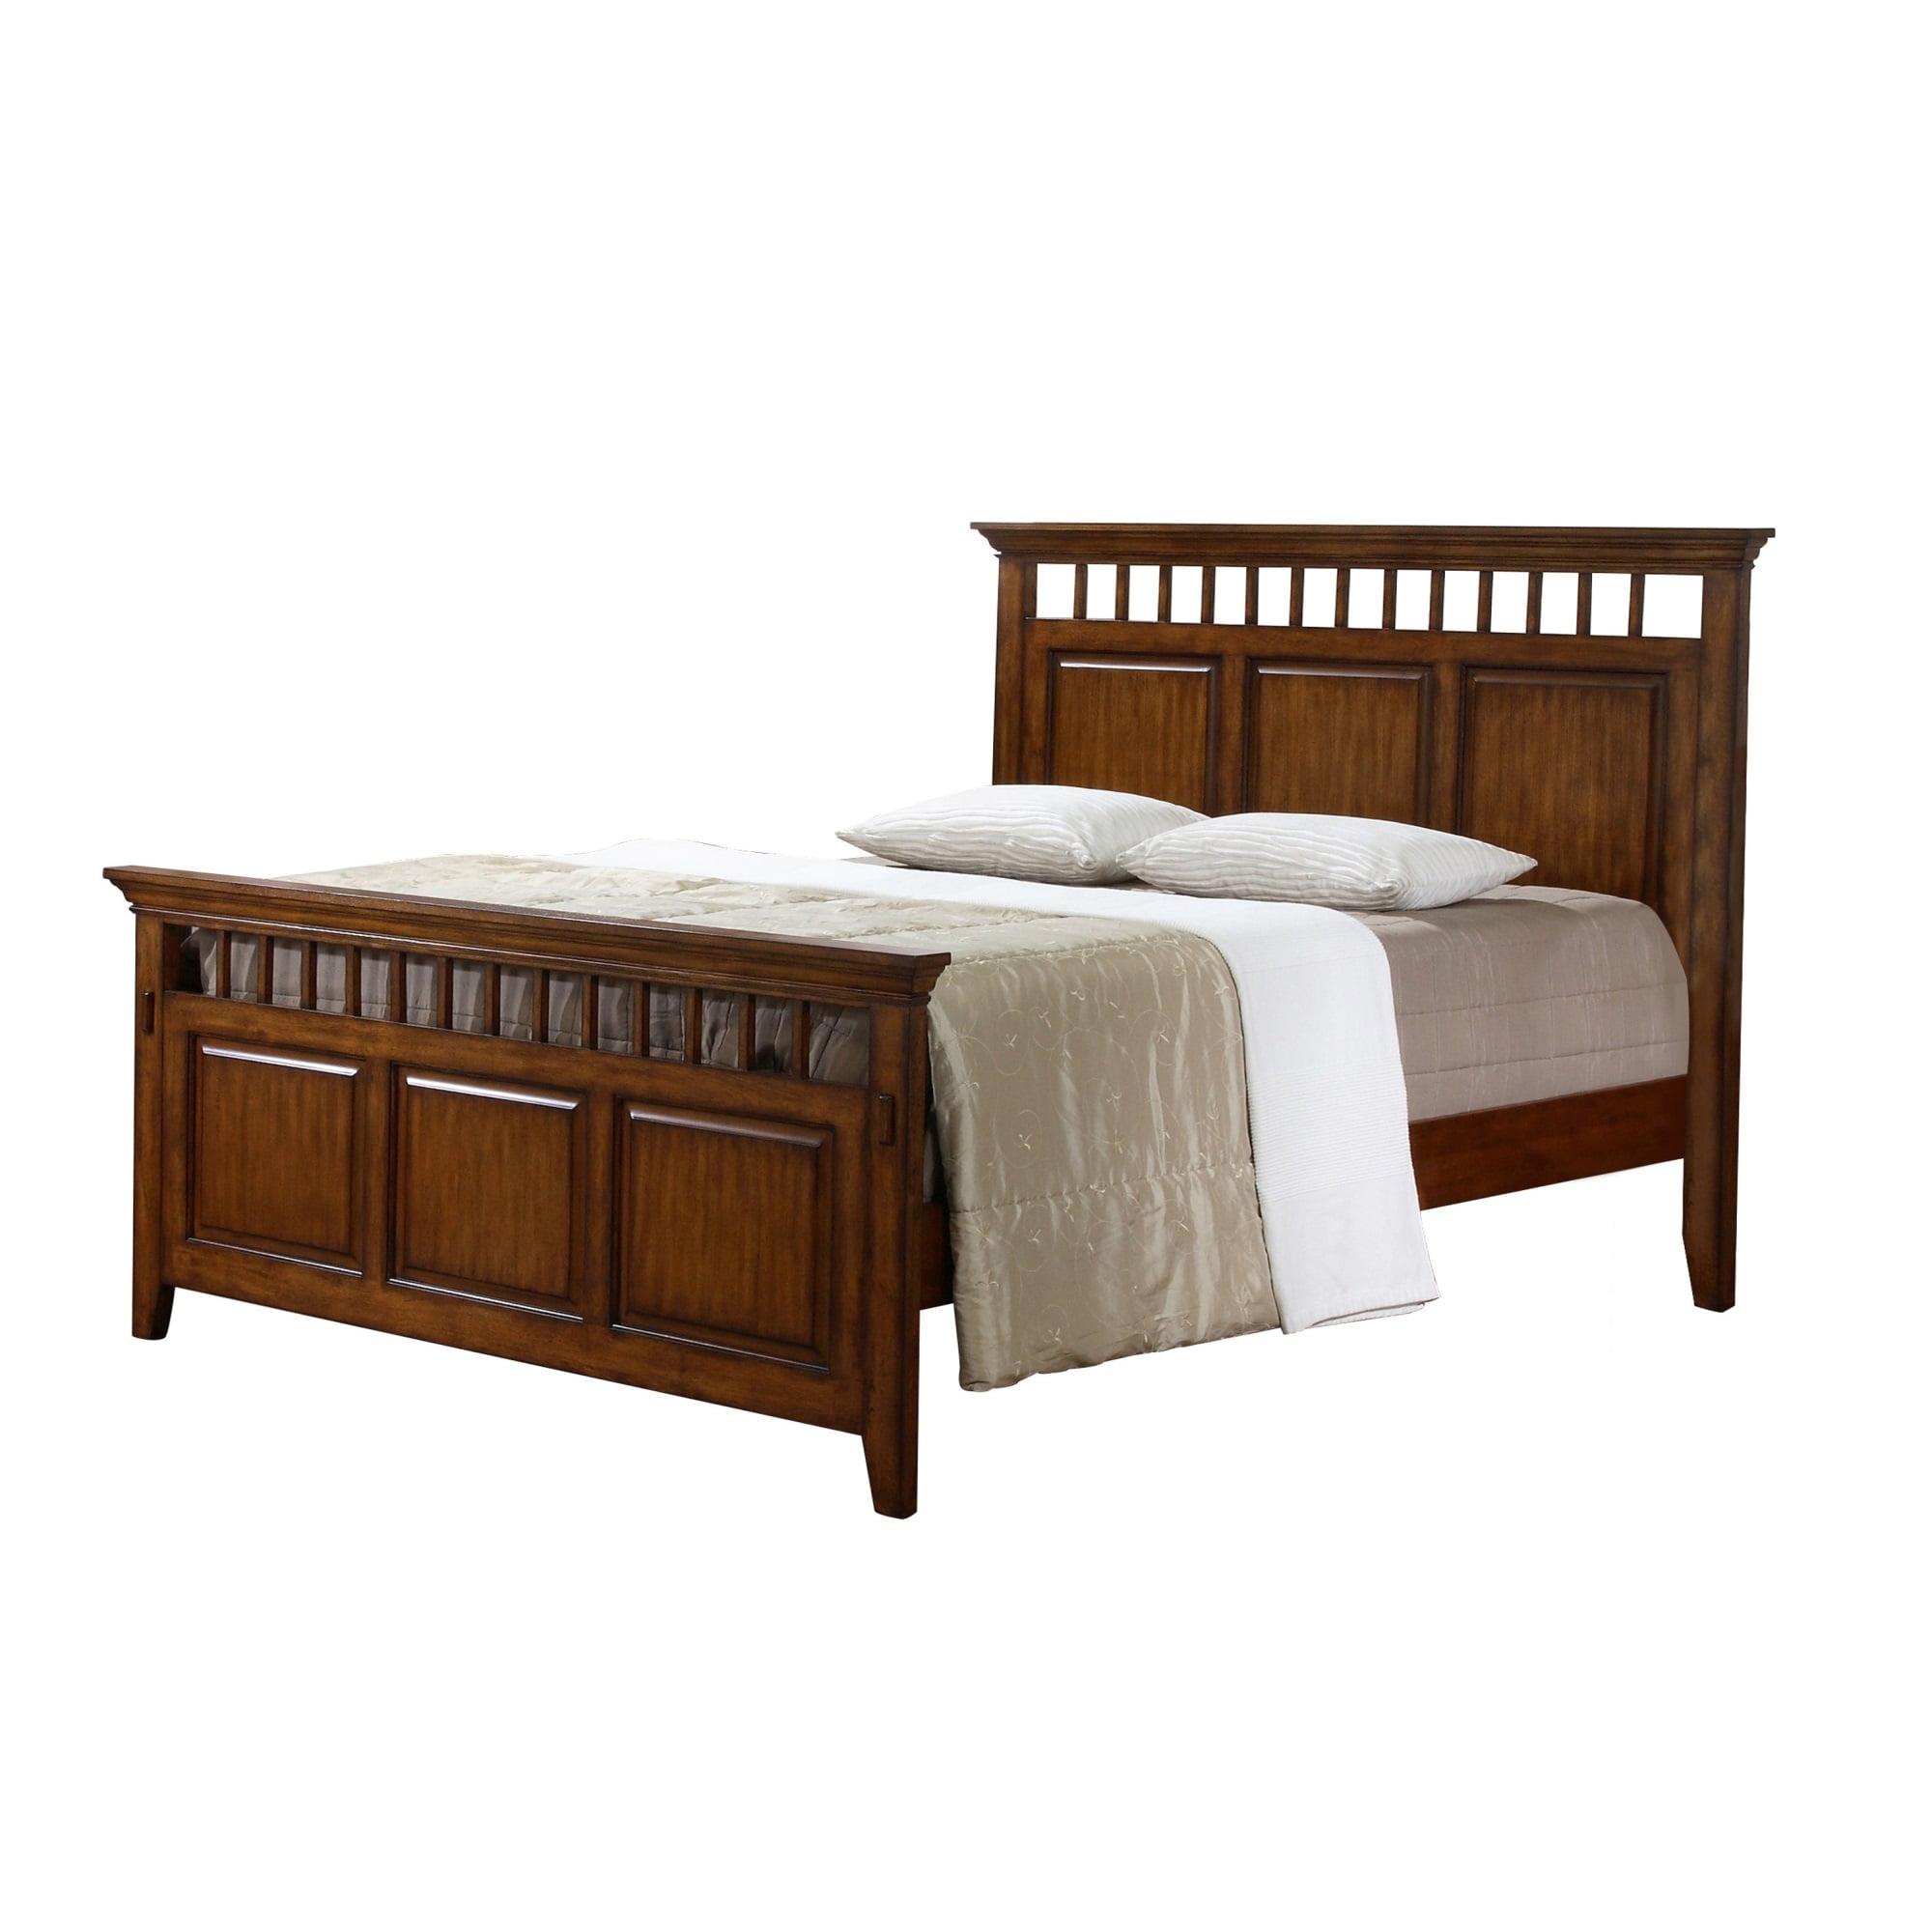 Tremont Mission-Style King Bed in Distressed Brown